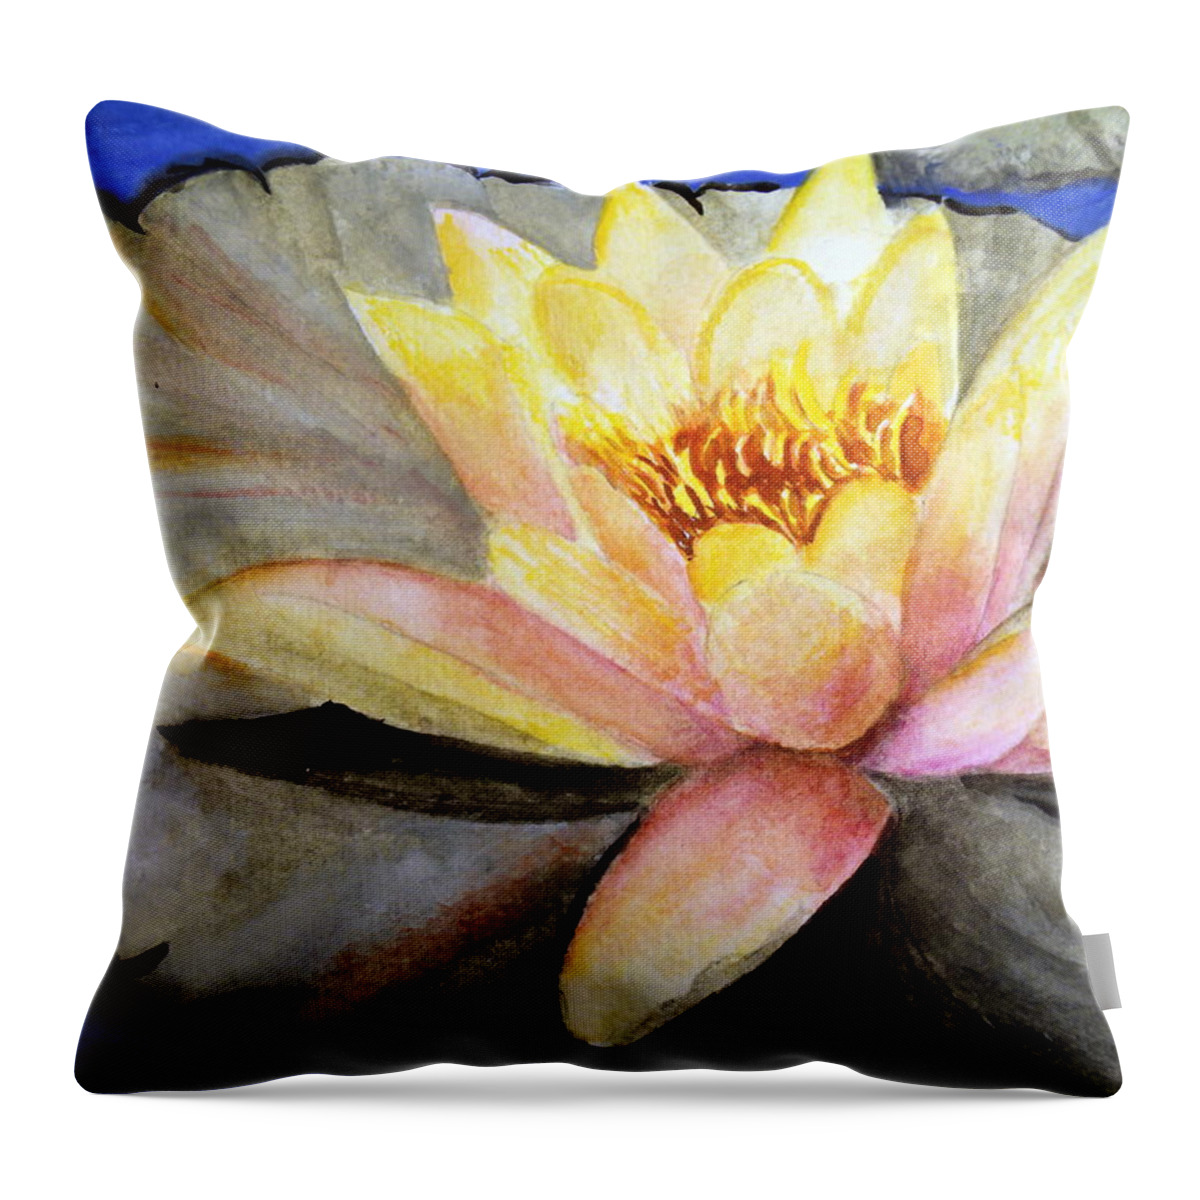 Waterlily. Flower. Water Garden Throw Pillow featuring the painting Waterlily by Carol Grimes